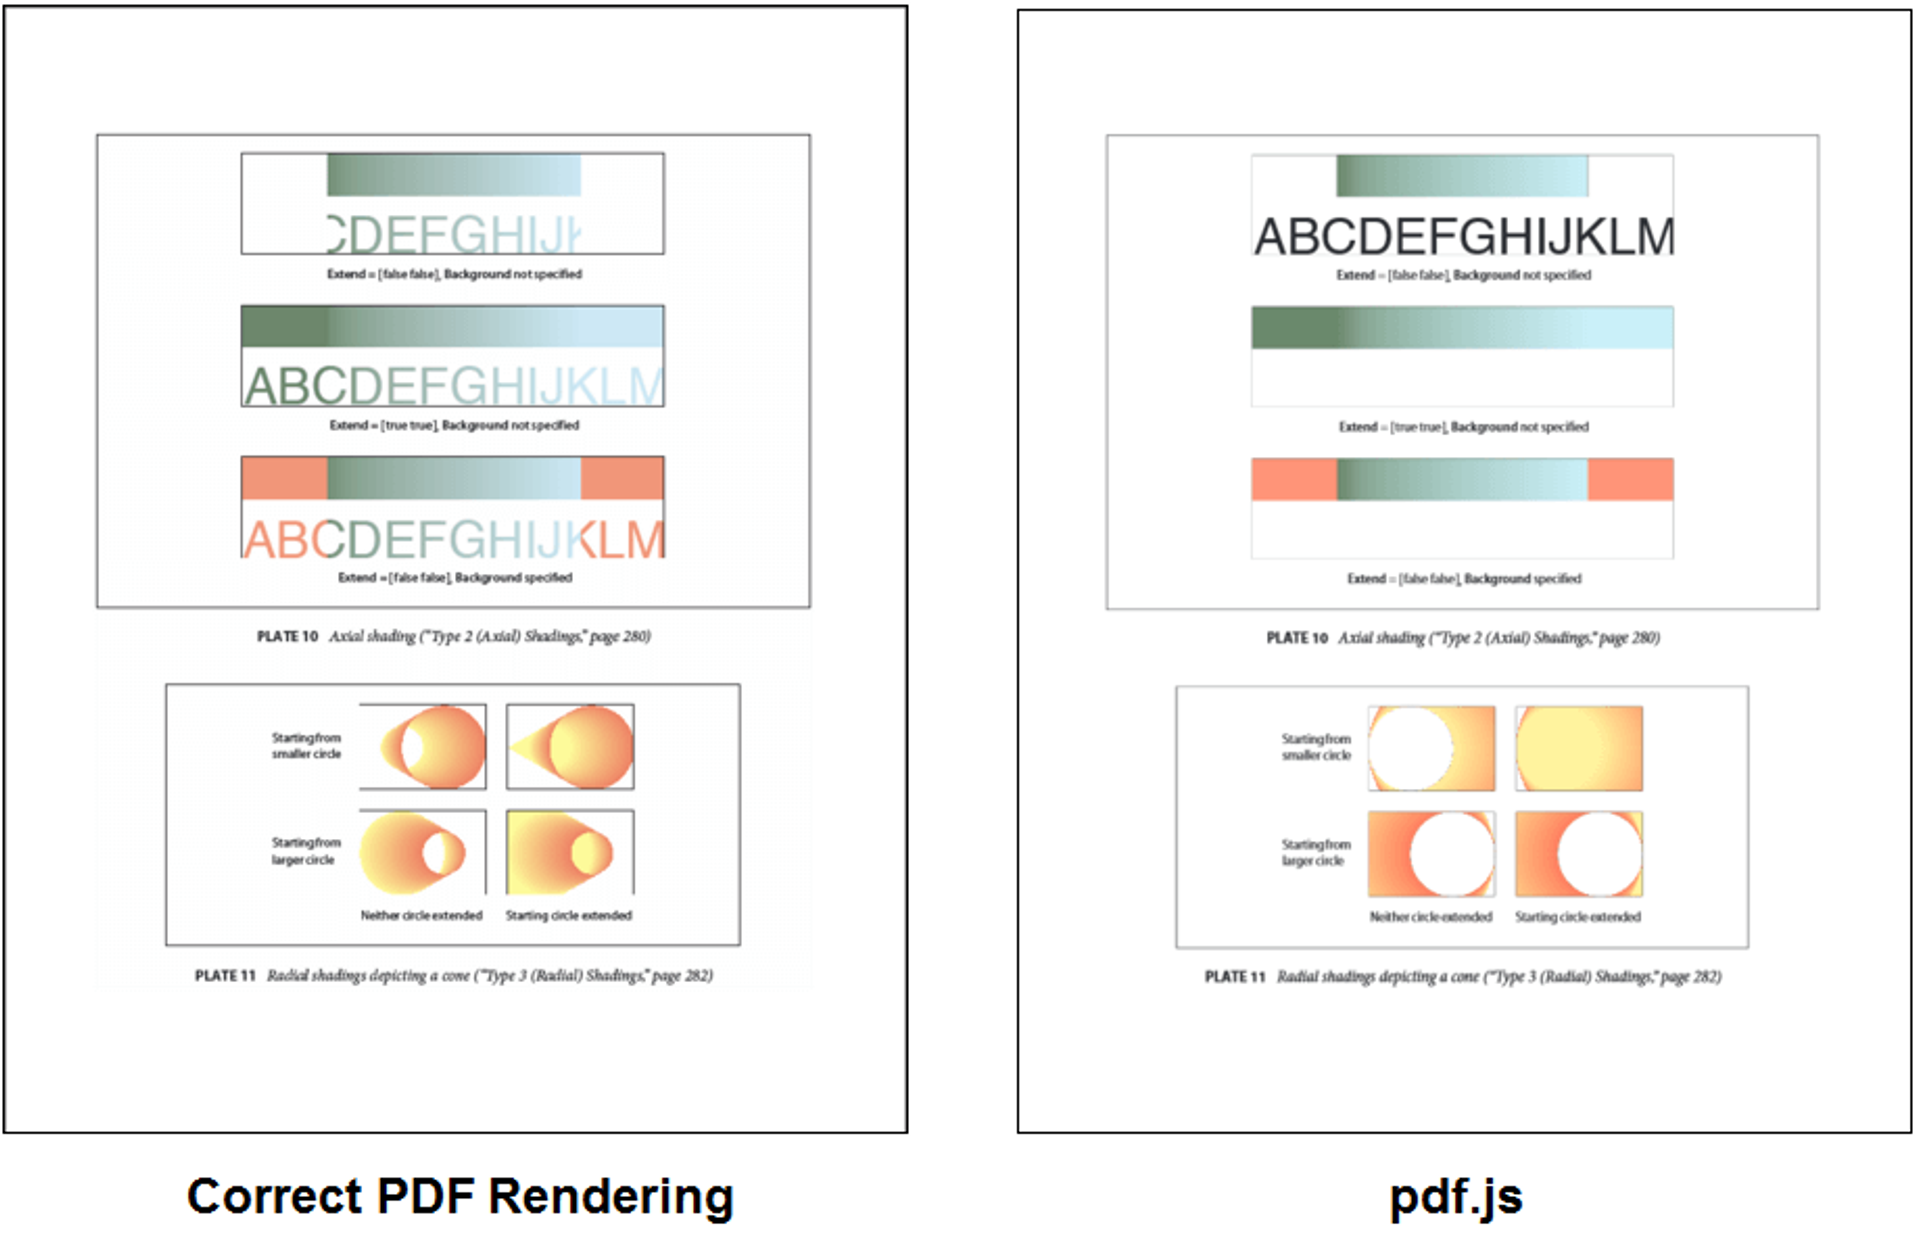 correct pdf rendering and pdf.js rendering compared